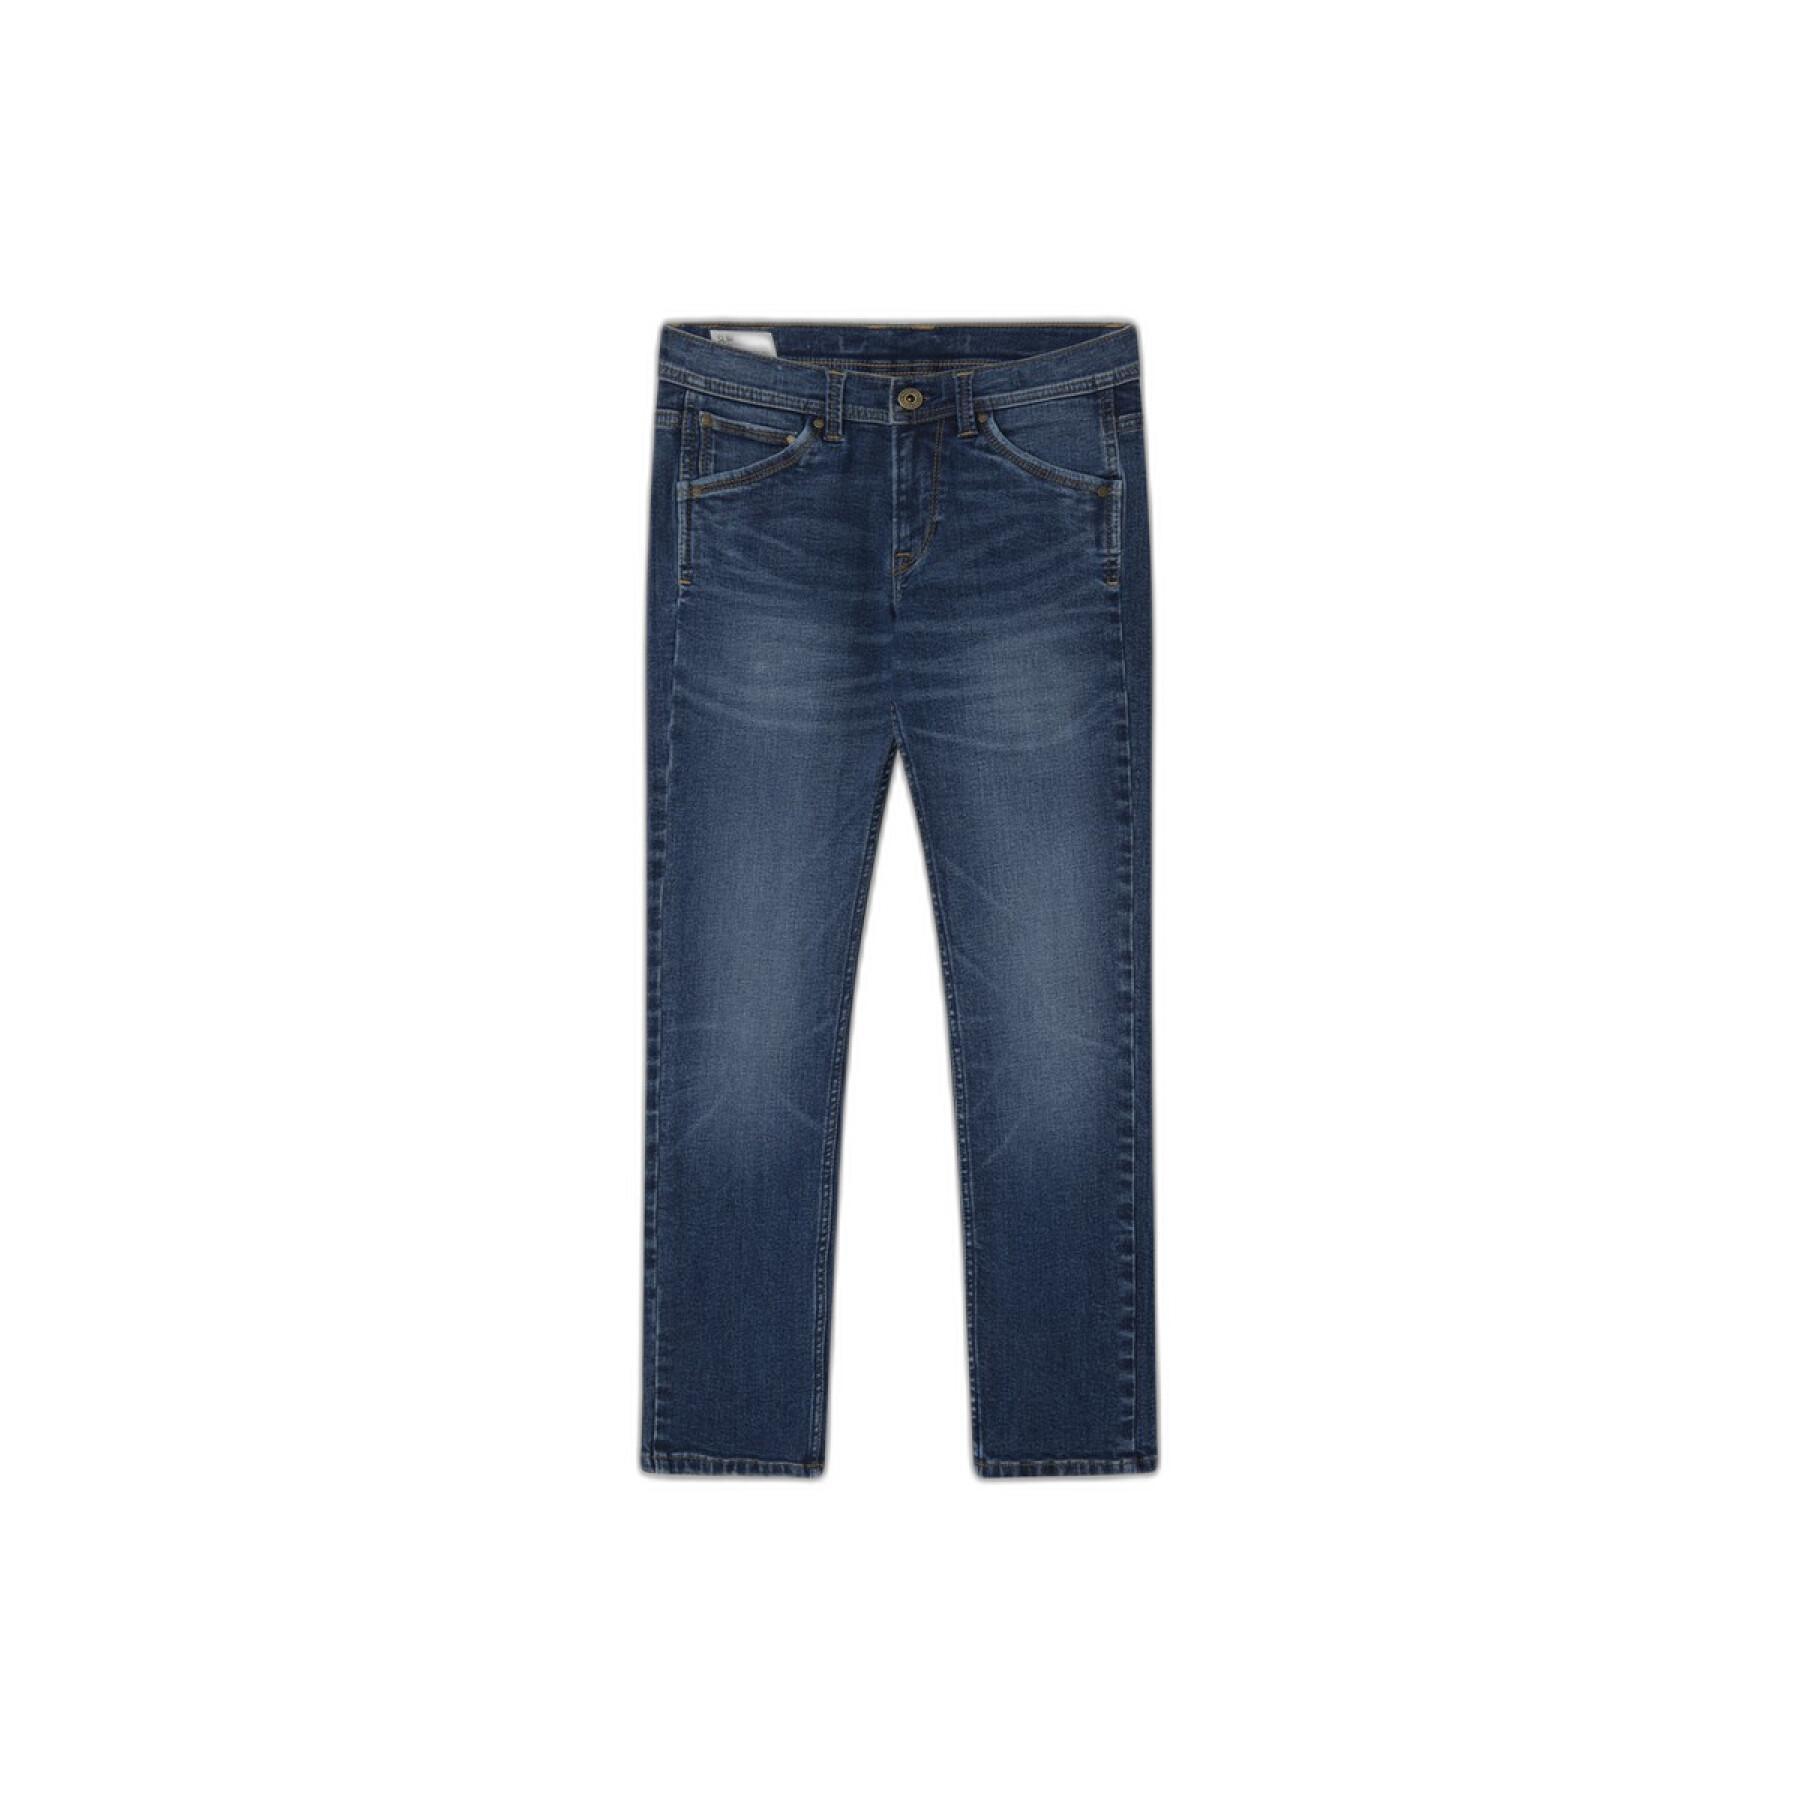 Children's jeans Pepe Jeans Cashed